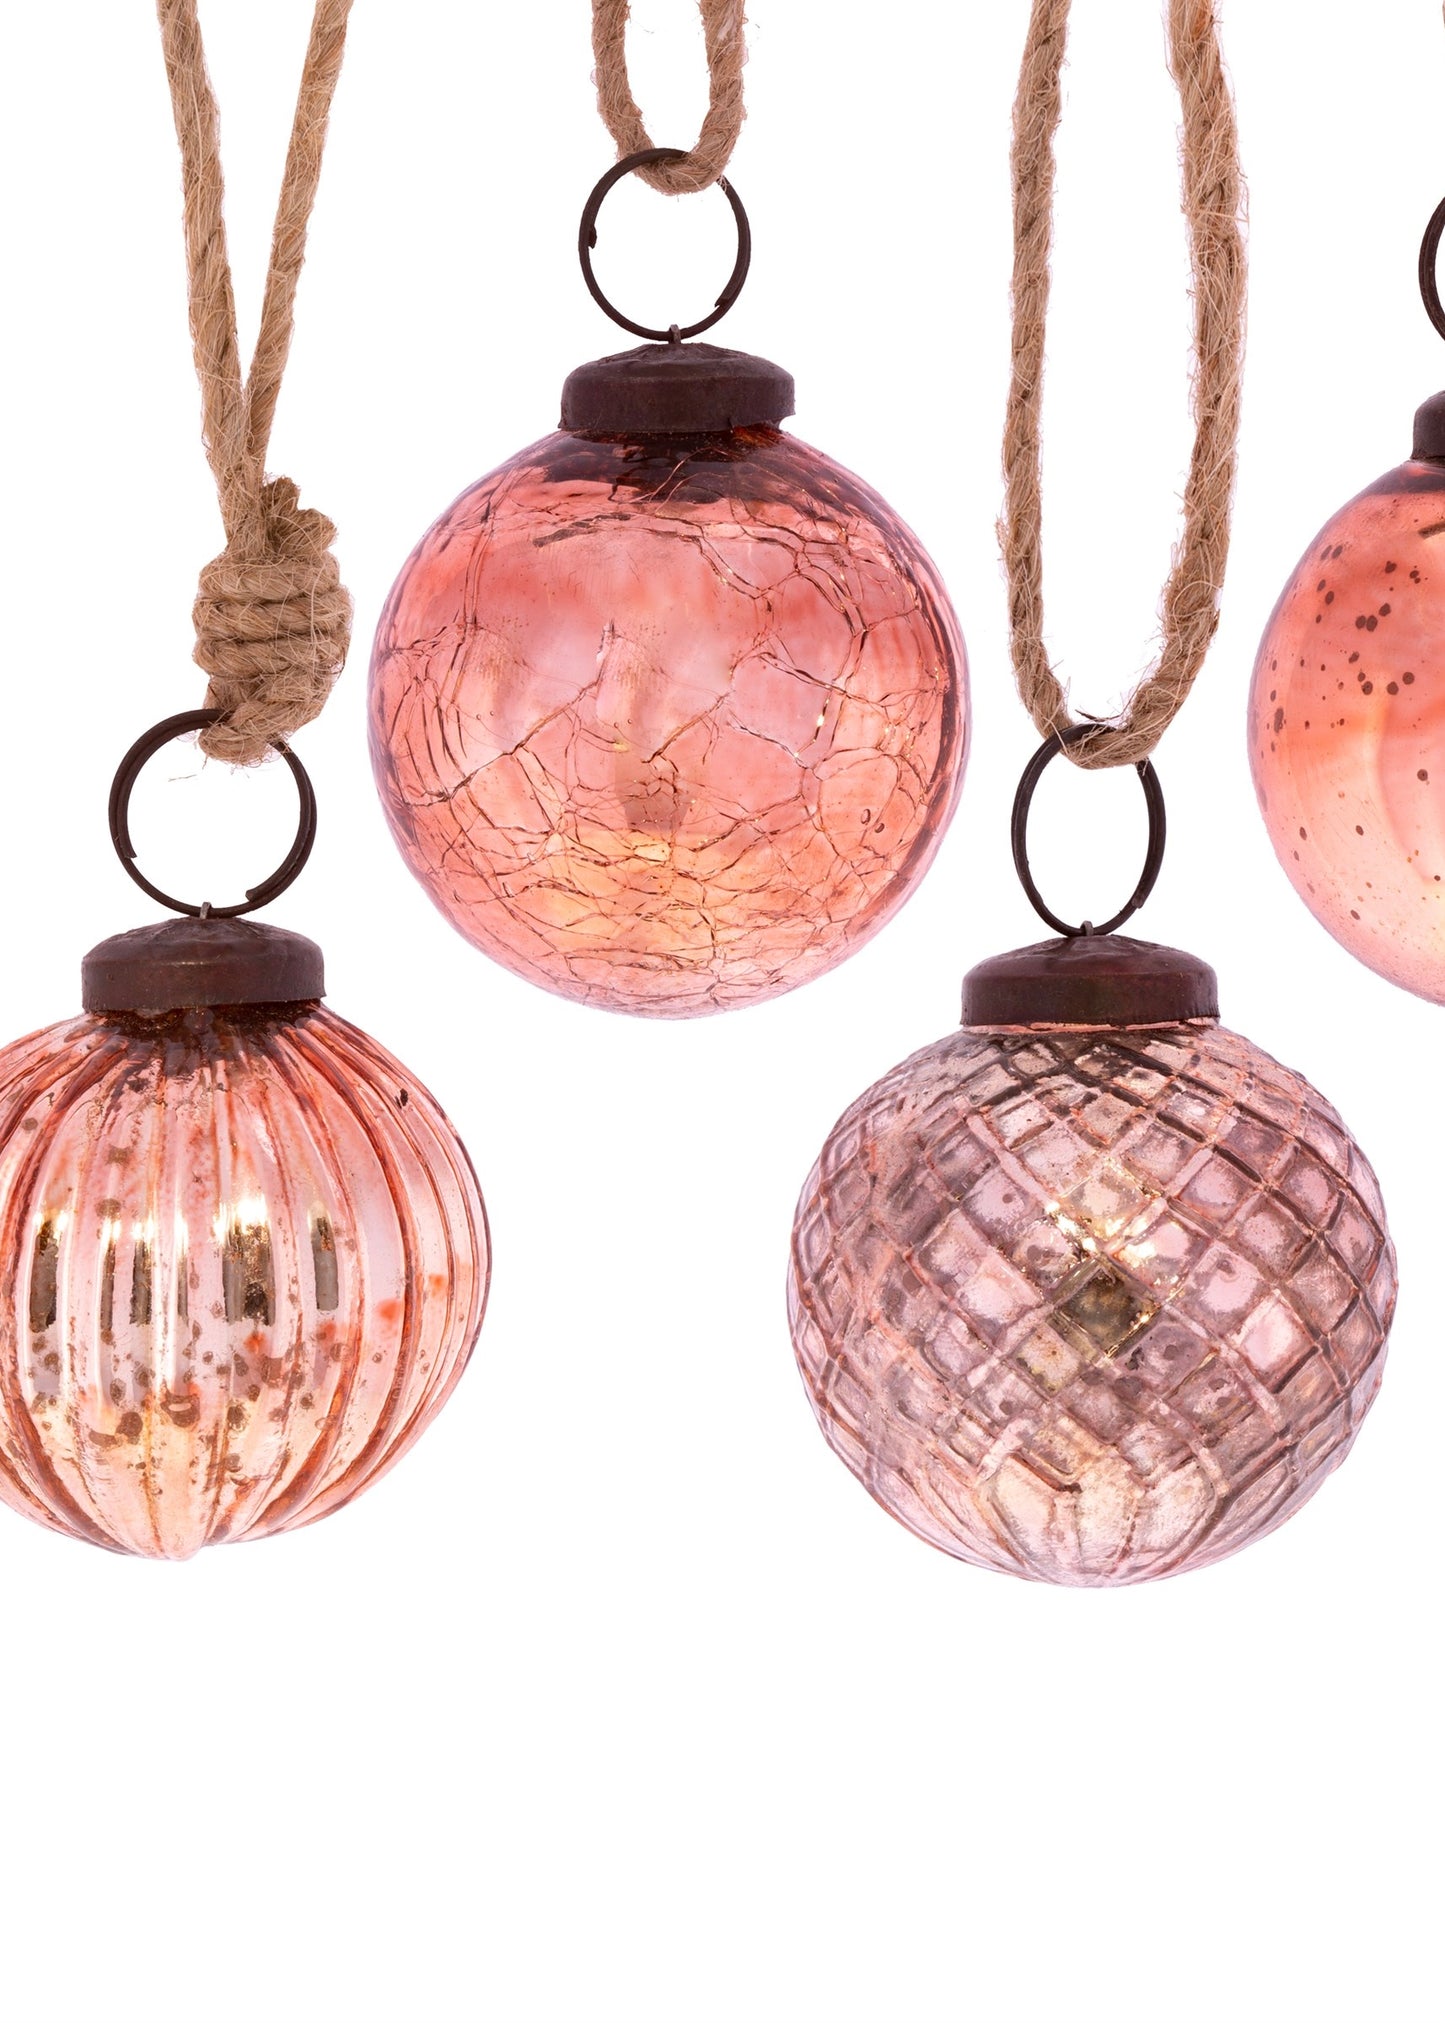 Copper cracked and Patterned bauble 